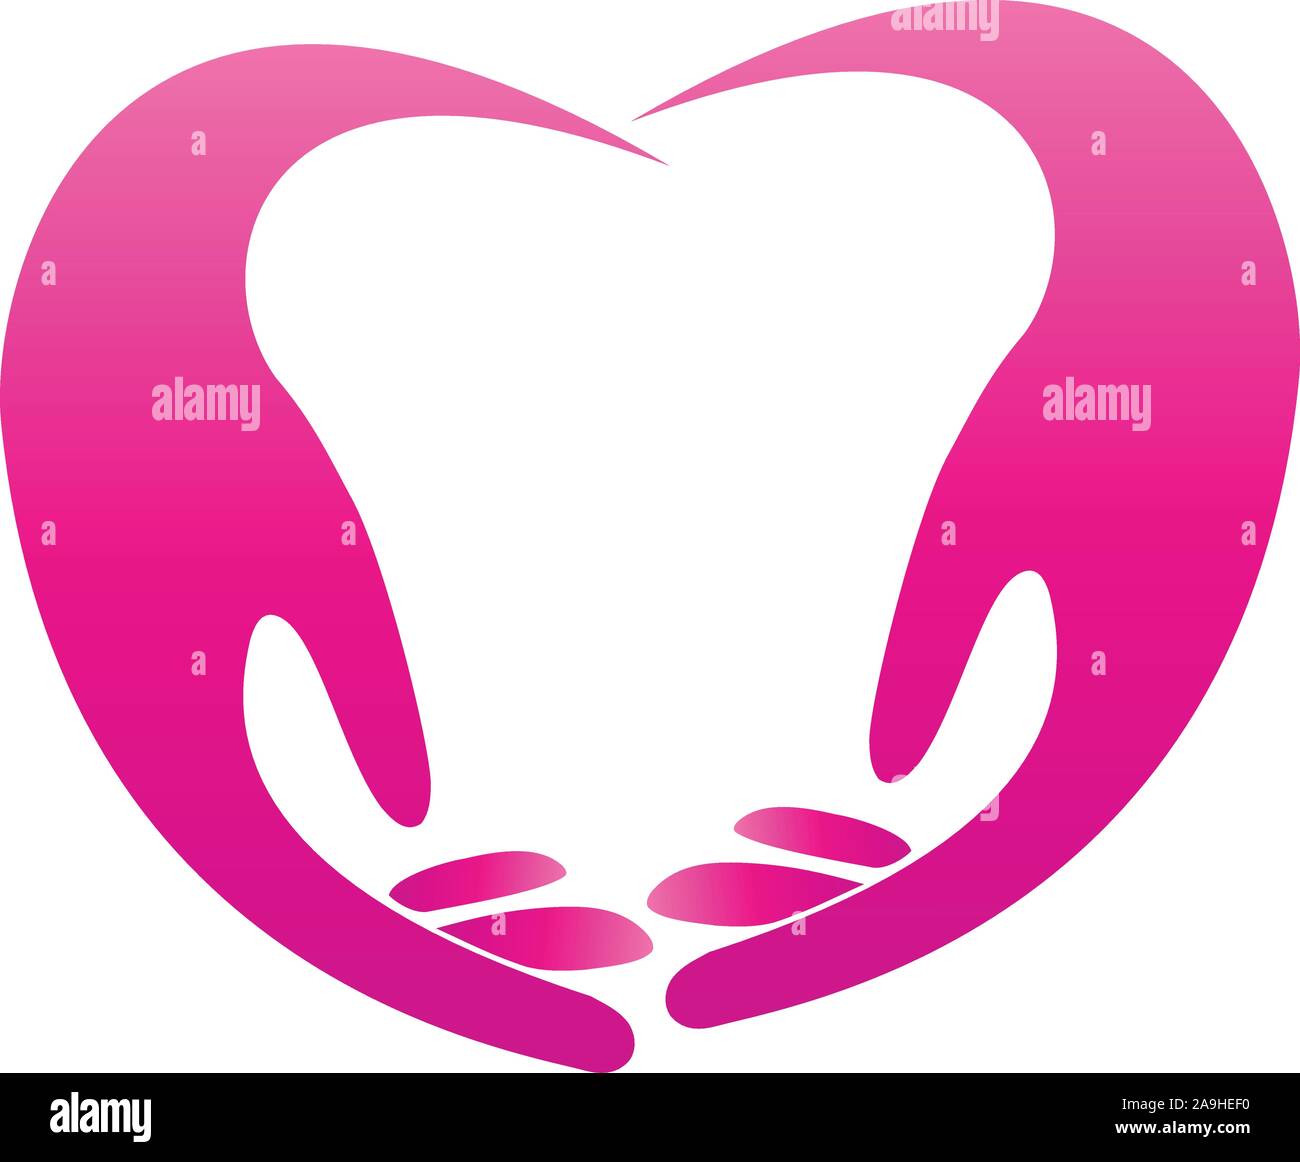 Two Hands Hands Physiotherapy Occupational Therapy Logo Stock Vector Image Art Alamy